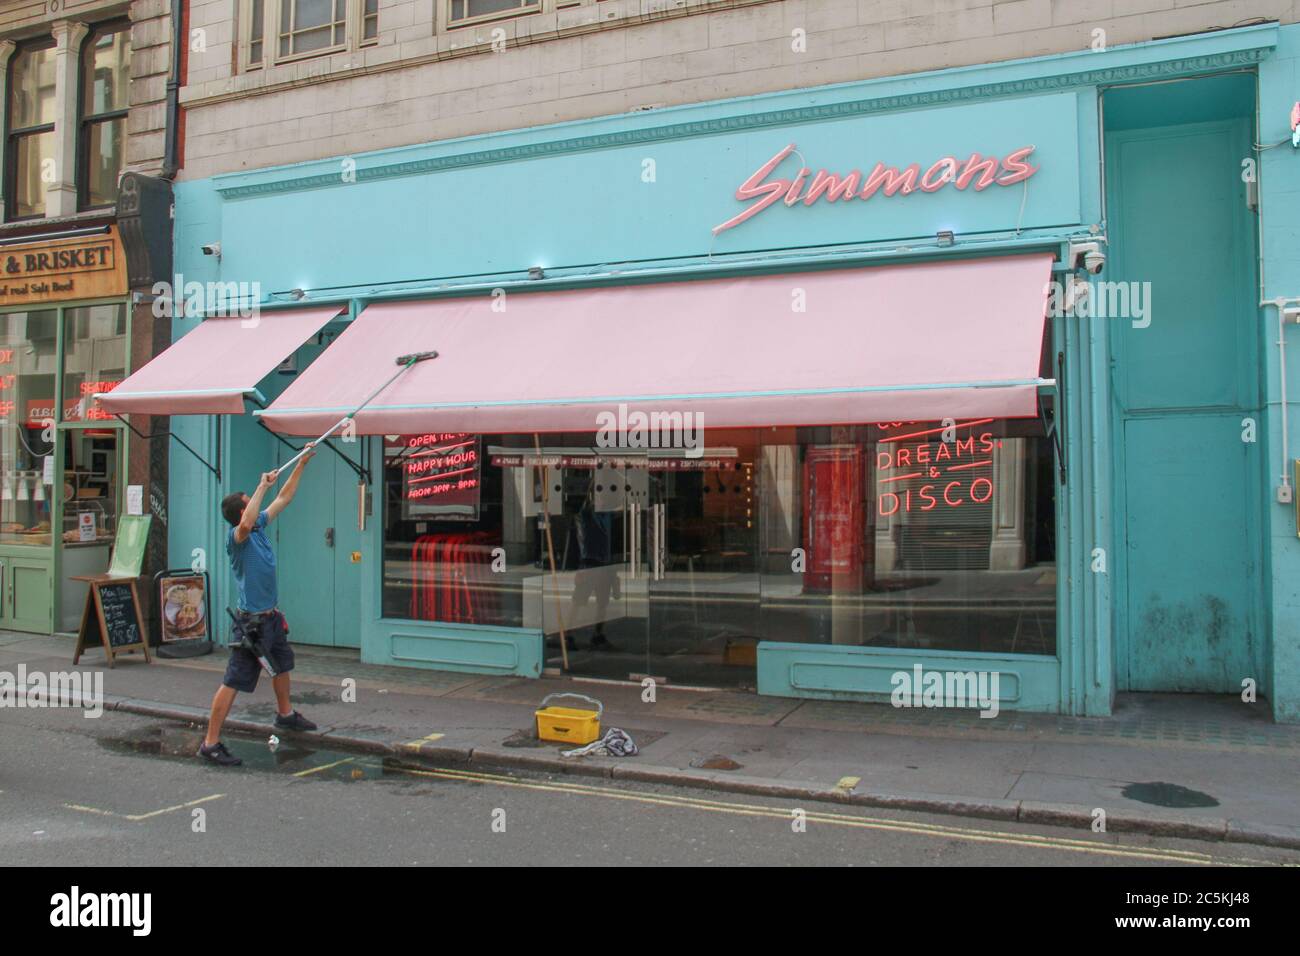 Westminster, London, UK - 3 July 2020: A worker cleans up a canopy of a pub on Wardour Street. Daily life in London on a friday ahead of the opening of pubs on the 4th of July as per new Government advice. Stock Photo